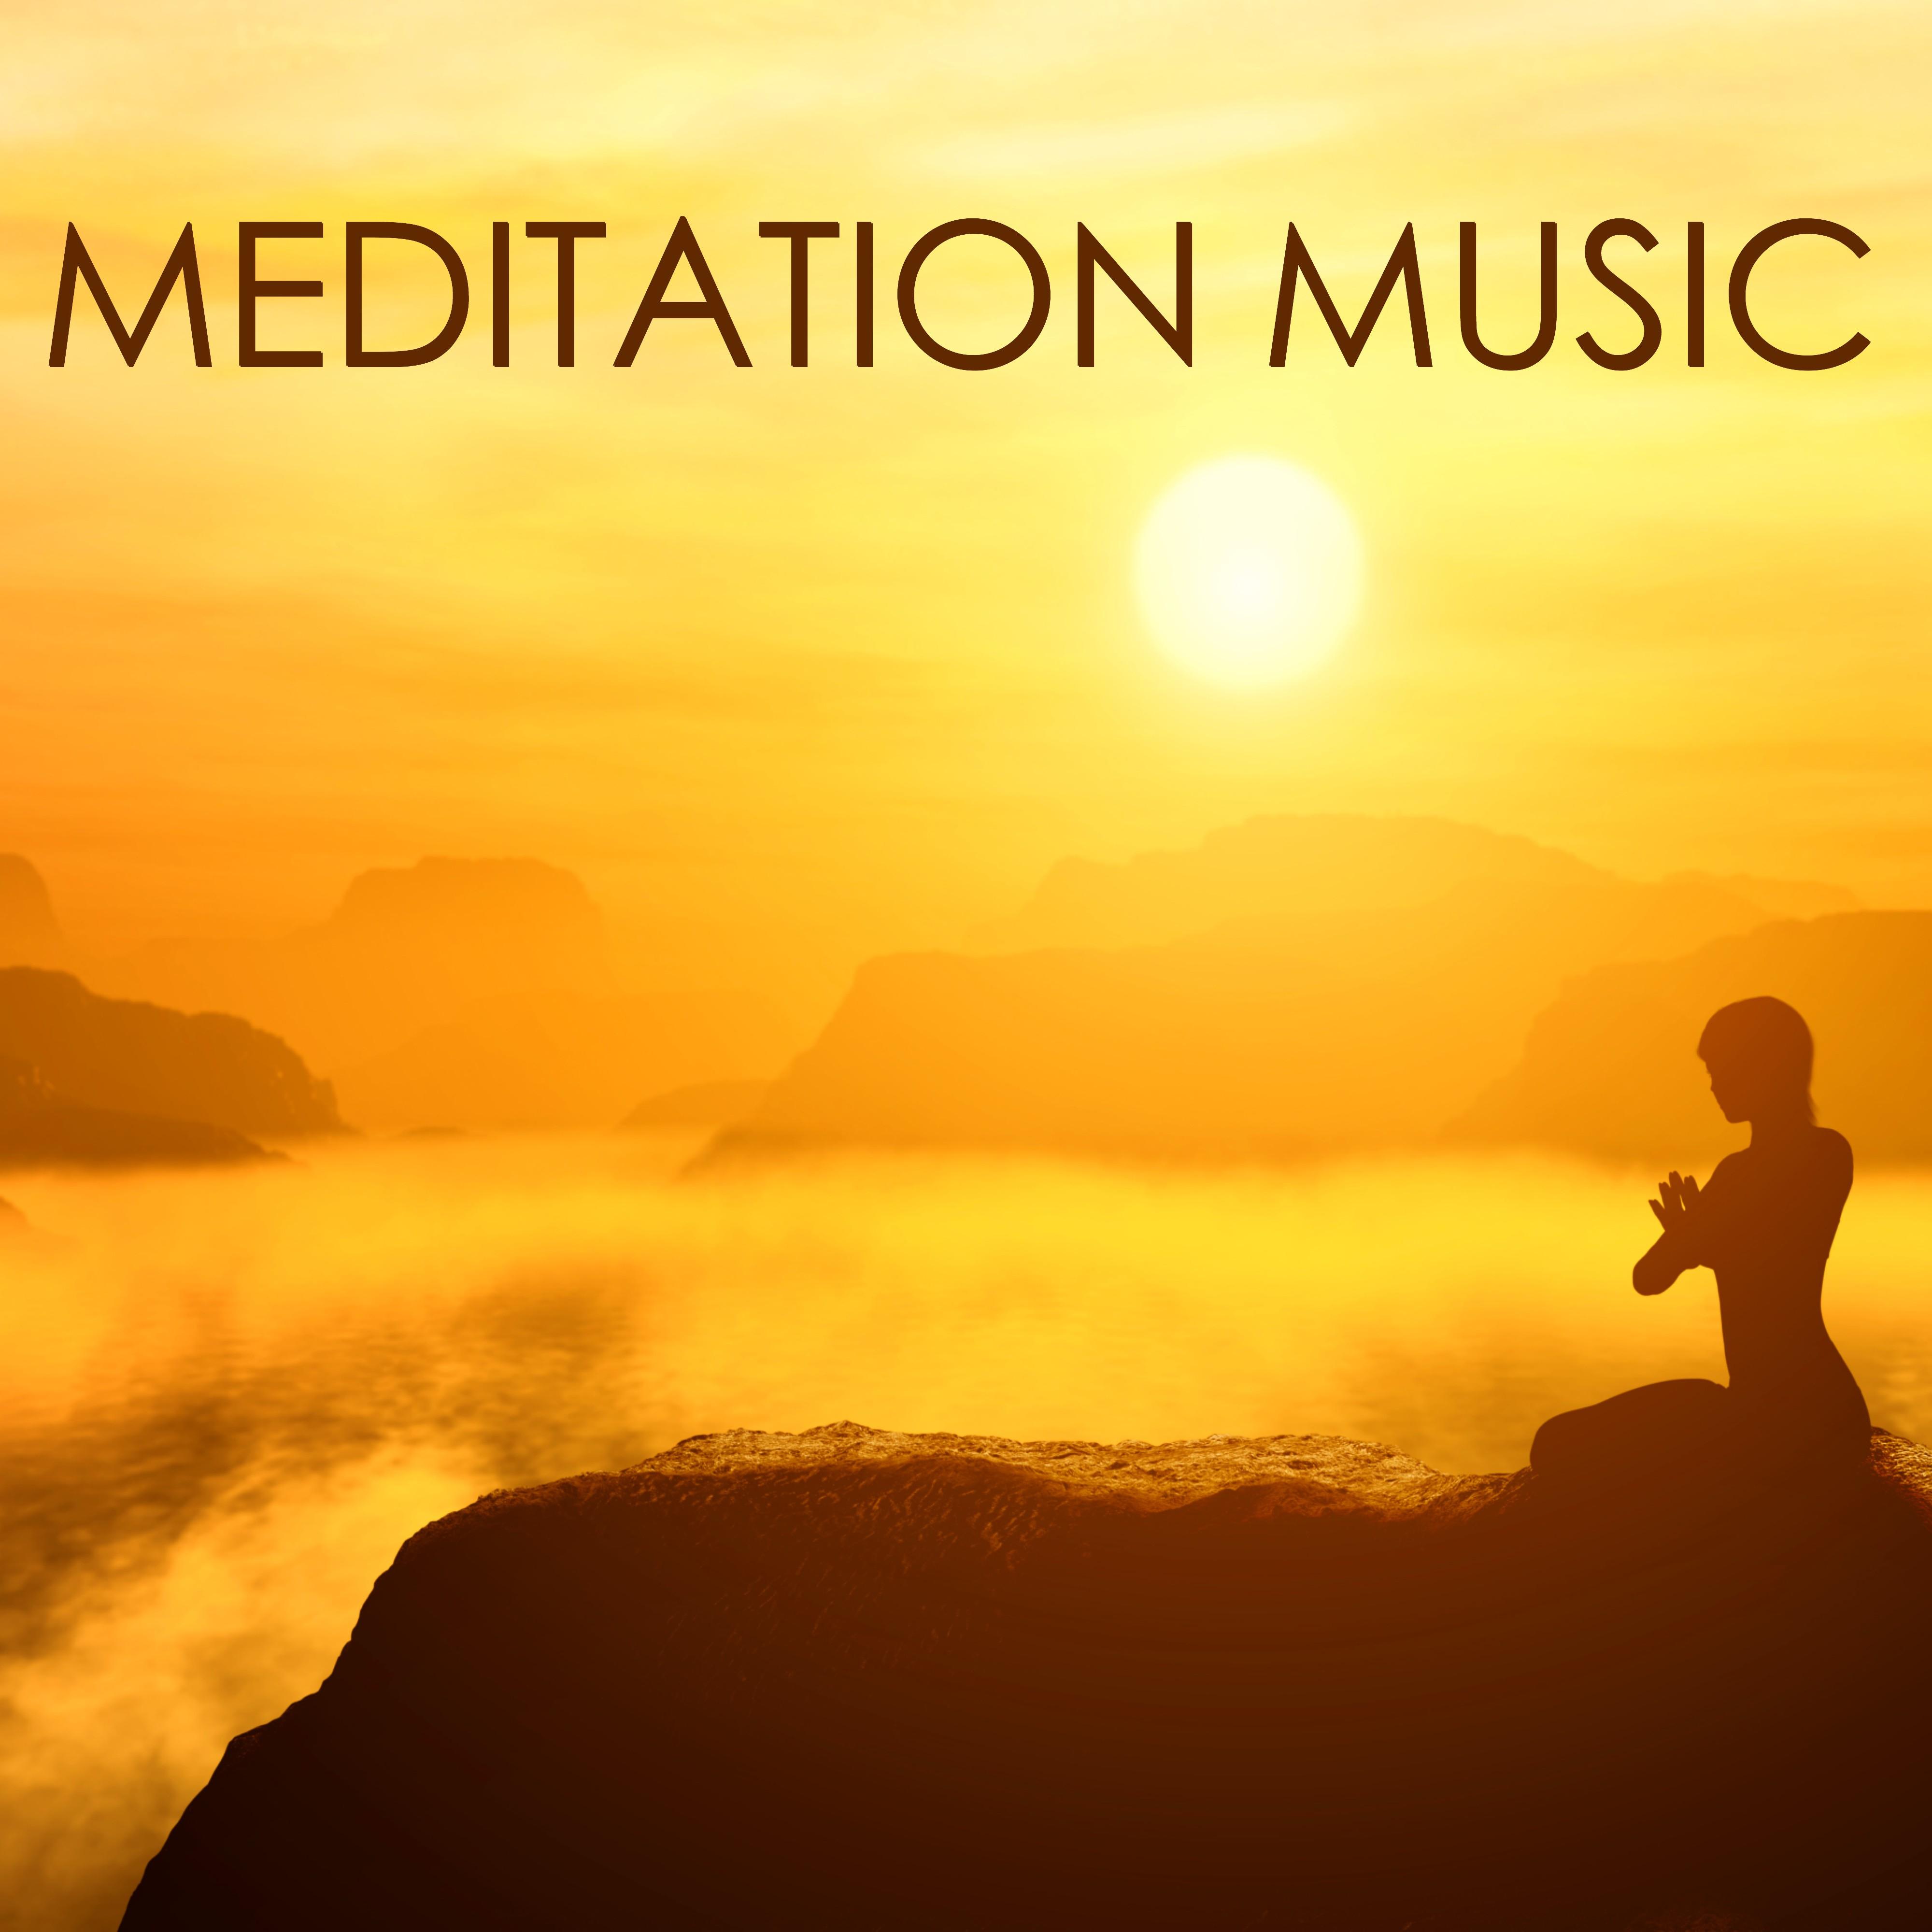 Meditation Music - Sound Therapy with Nature Sounds for Relaxation Meditation, Deep Sleep, Studying, Healing Massage, Spa, Sound Therapy, Chakra Balancing, Baby Sleep